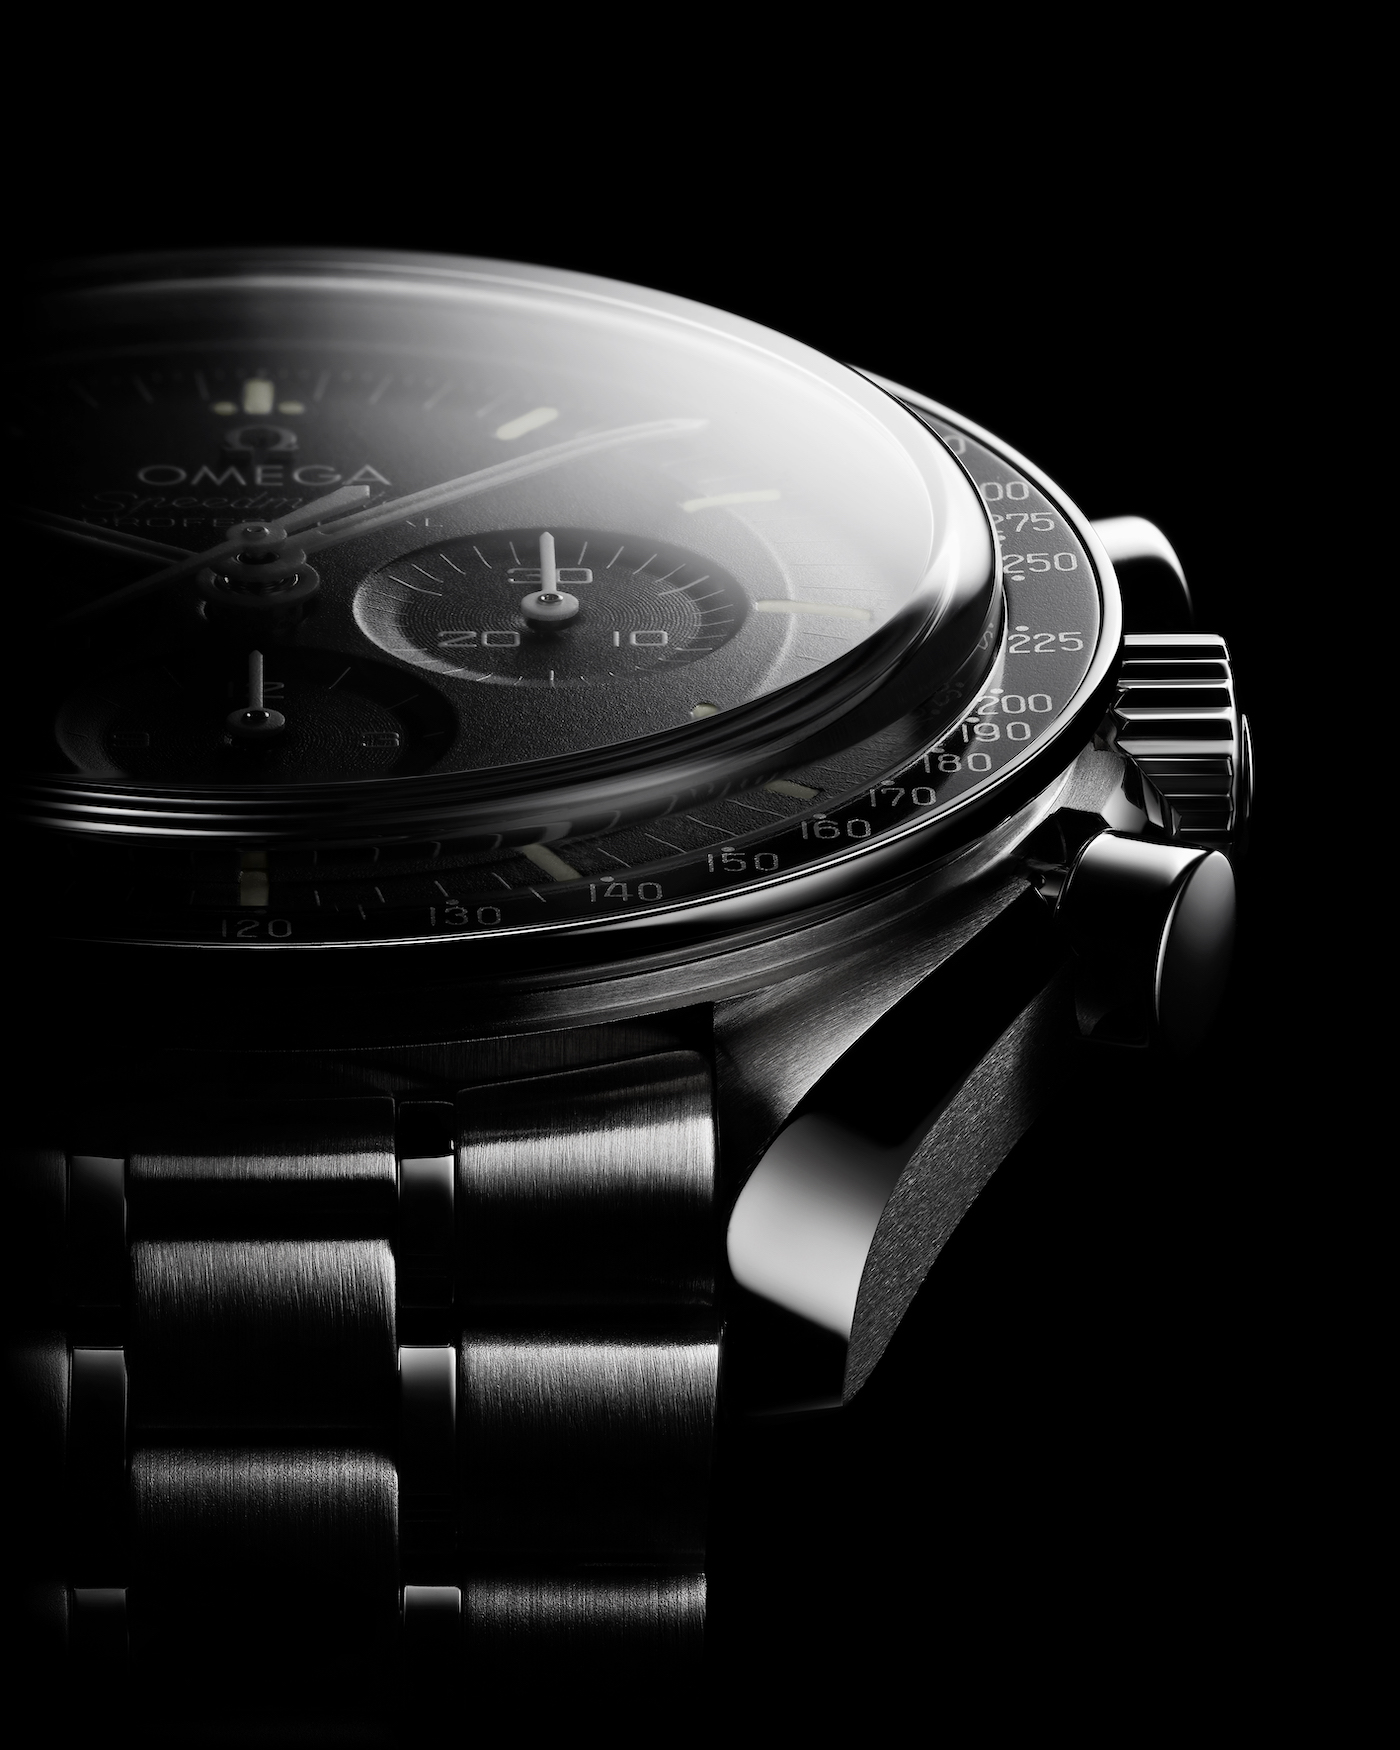 Behind the scenes: Omega's R&D in the 21st century